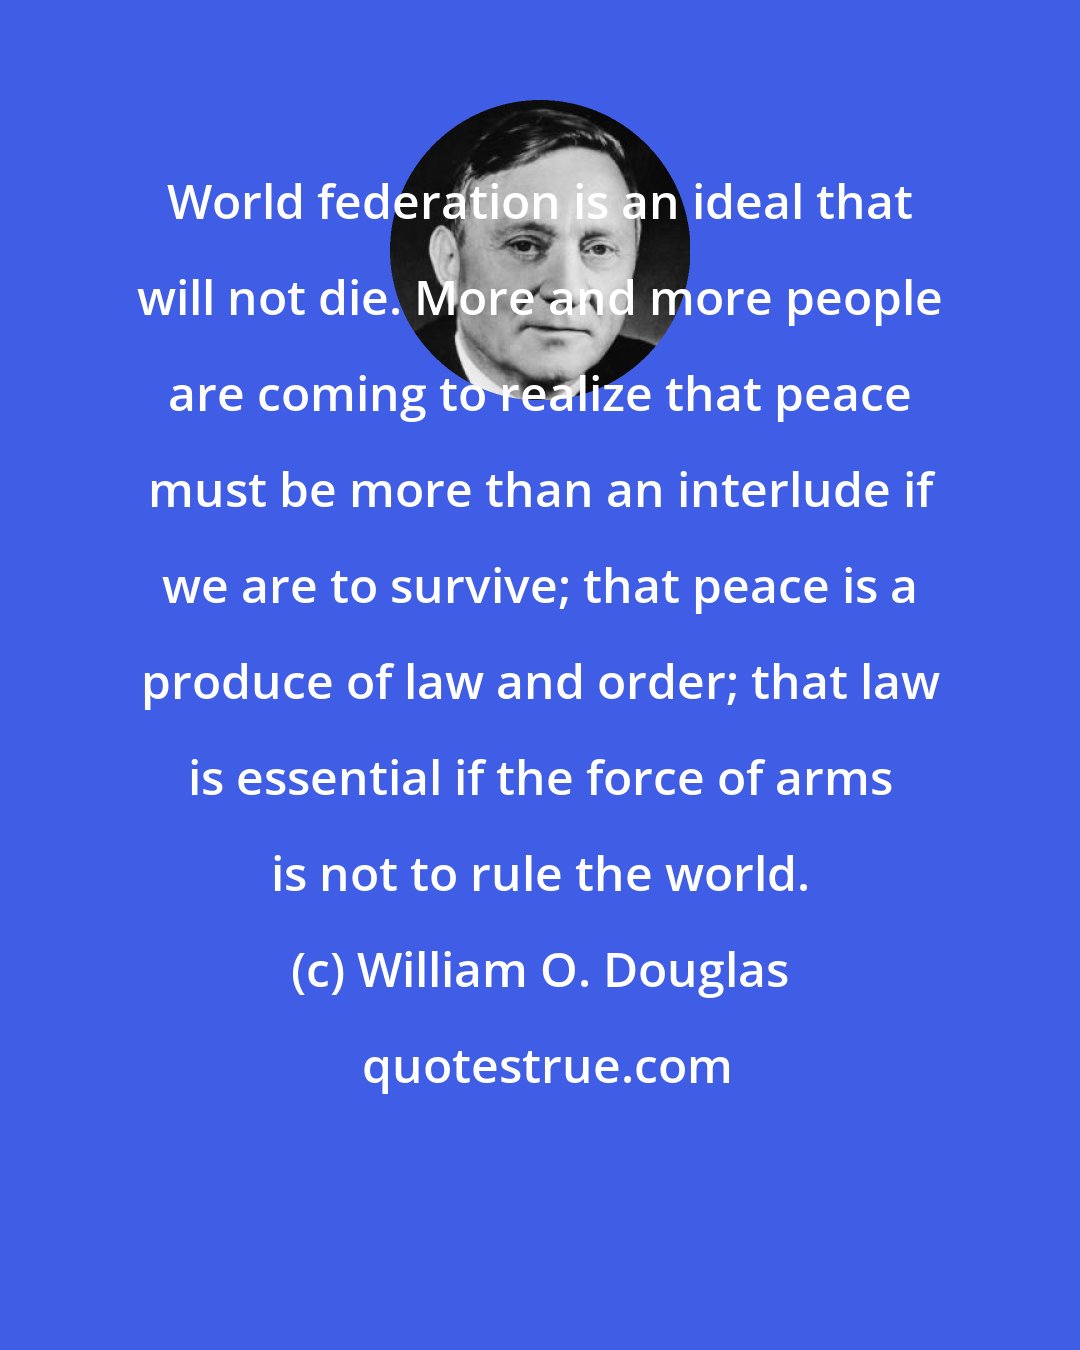 William O. Douglas: World federation is an ideal that will not die. More and more people are coming to realize that peace must be more than an interlude if we are to survive; that peace is a produce of law and order; that law is essential if the force of arms is not to rule the world.